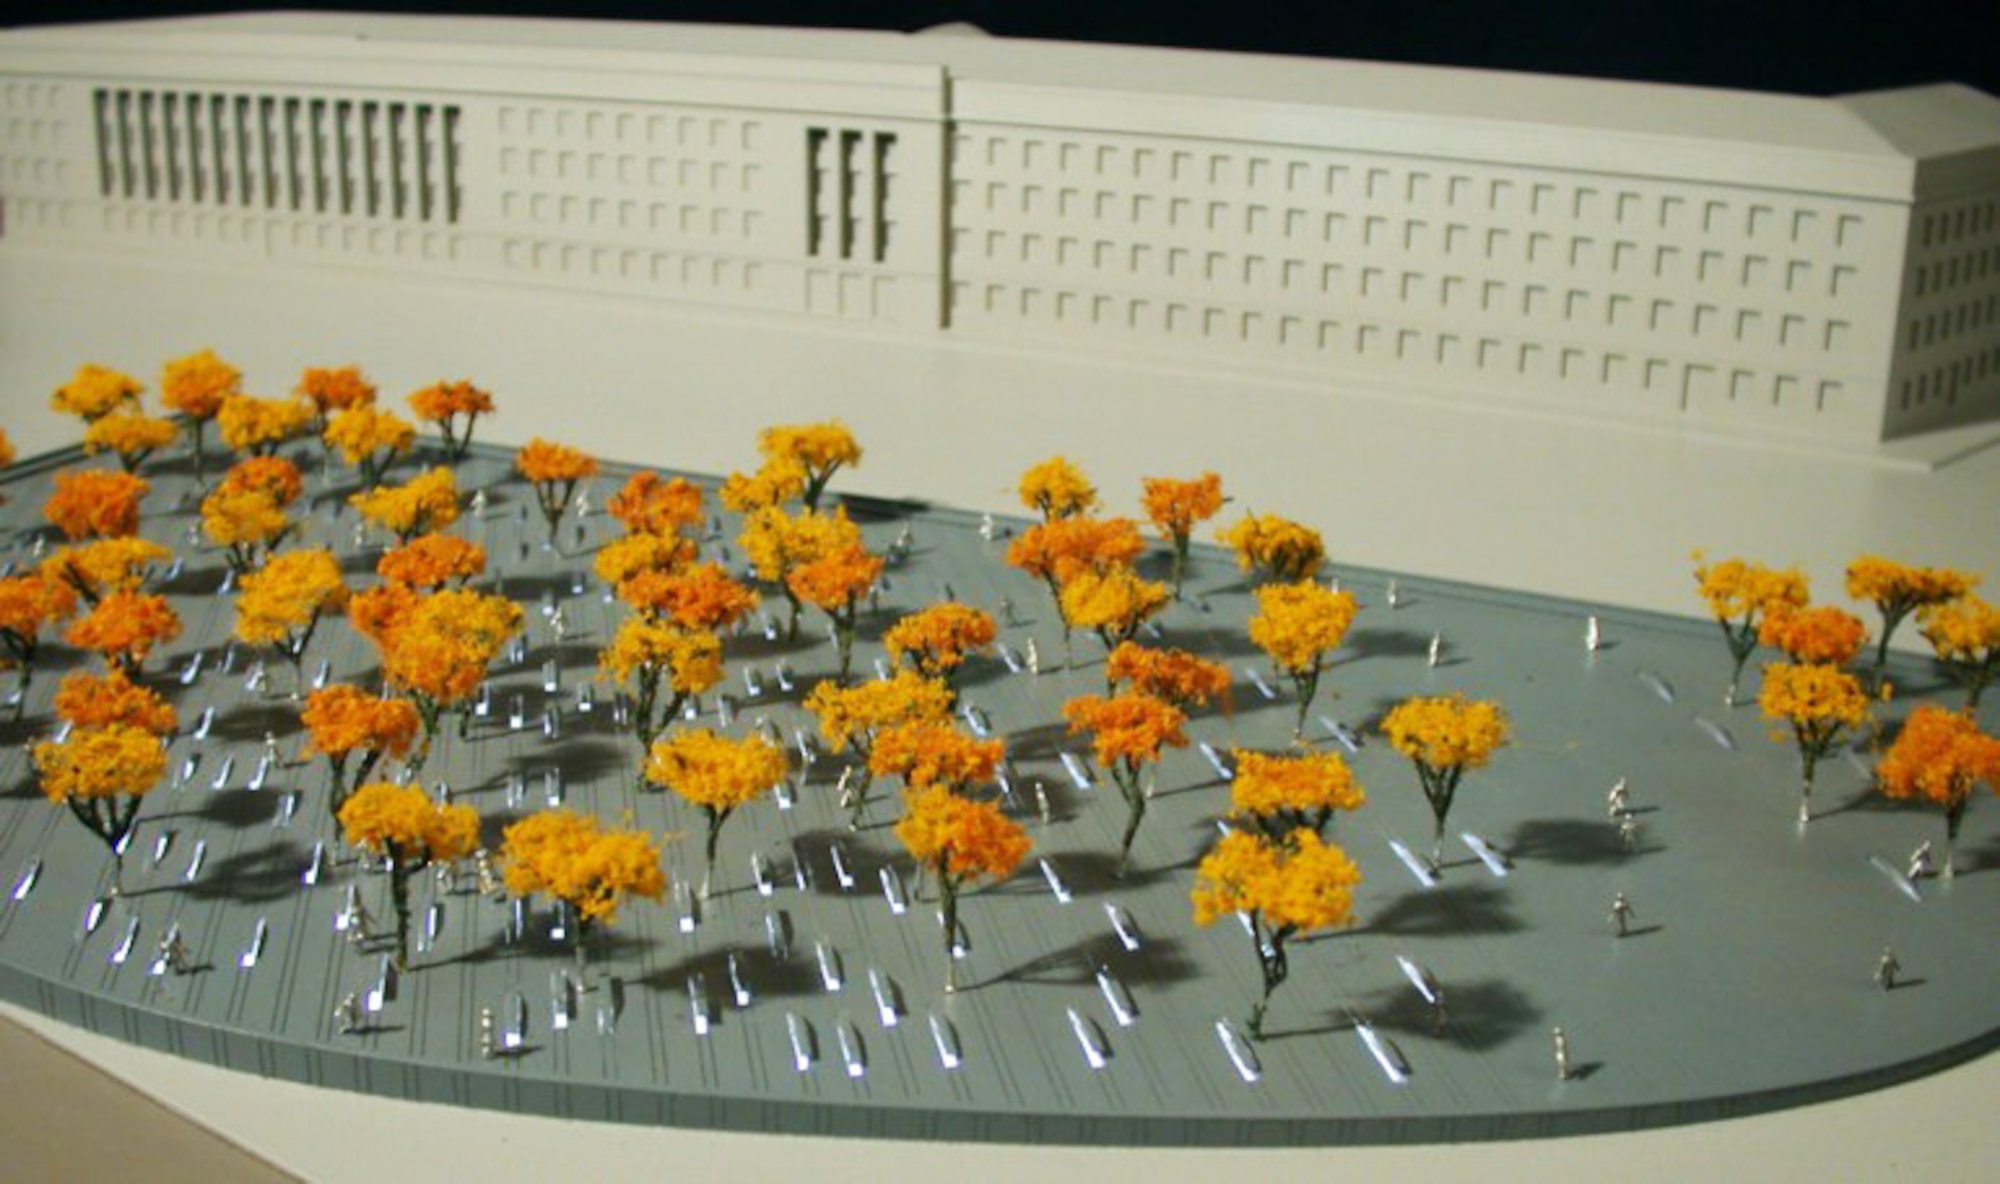 This artist's rendition of the Pentagon Memorial shows the 184 memorial units, each dedicated to an individual victim, including the 59 lives lost on American Airlines Flight 77 and the 125 lives lost in the Pentagon.  The memorial will be dedicated Sept. 11.  (DOD photo)